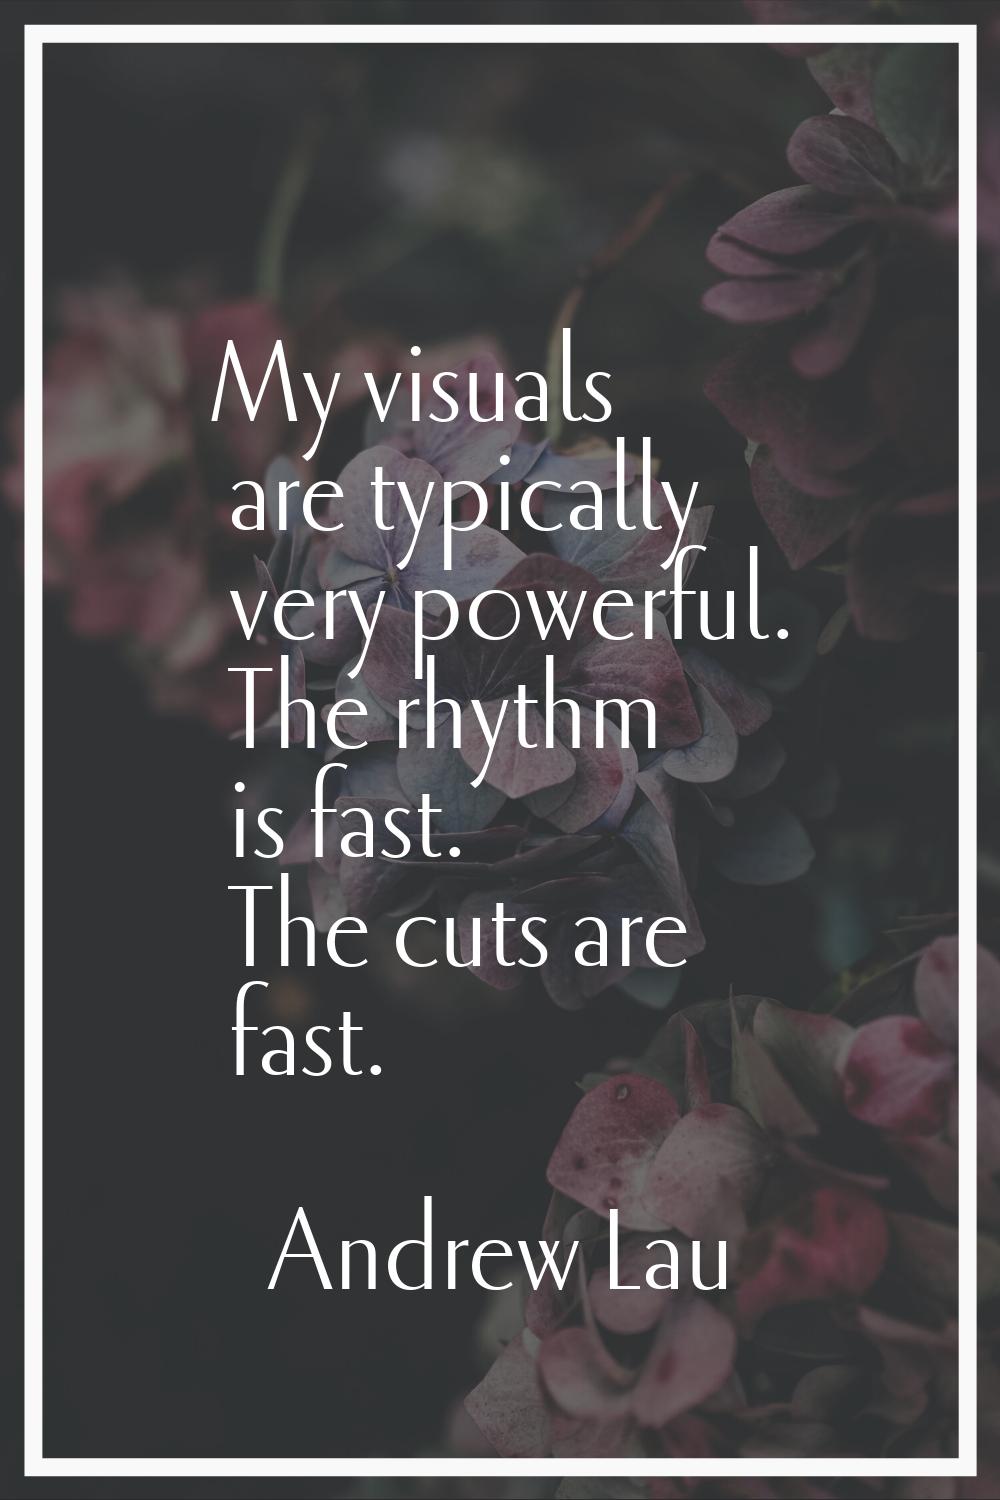 My visuals are typically very powerful. The rhythm is fast. The cuts are fast.